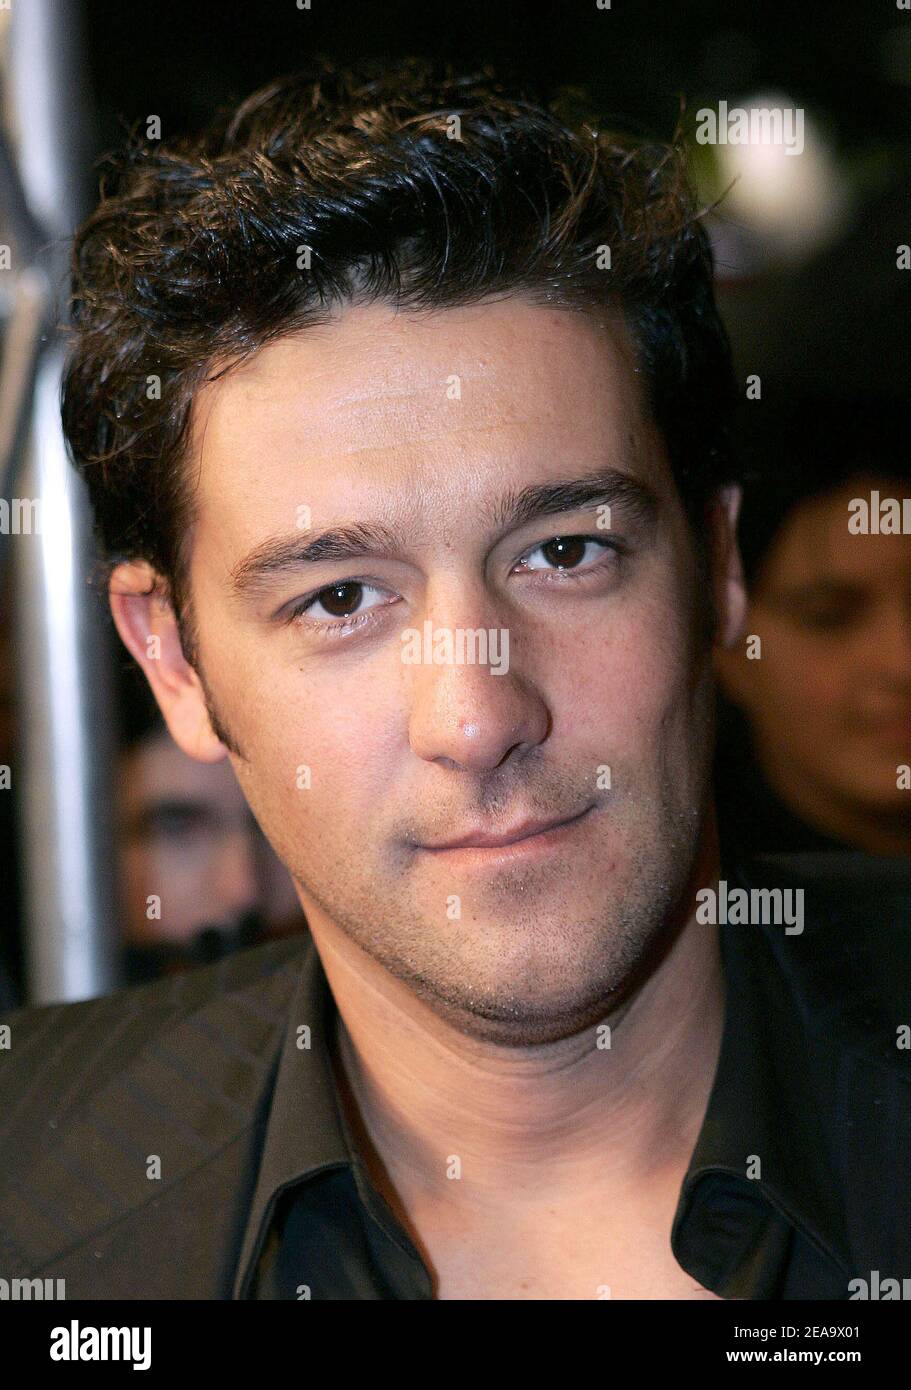 French humorist Titoff attends the French NRJ cine awards held at Le Grand Rex in Paris, france on September 30, 2005 . Photo by Laurent Zabulon/ABACAPRESS.COM. Stock Photo